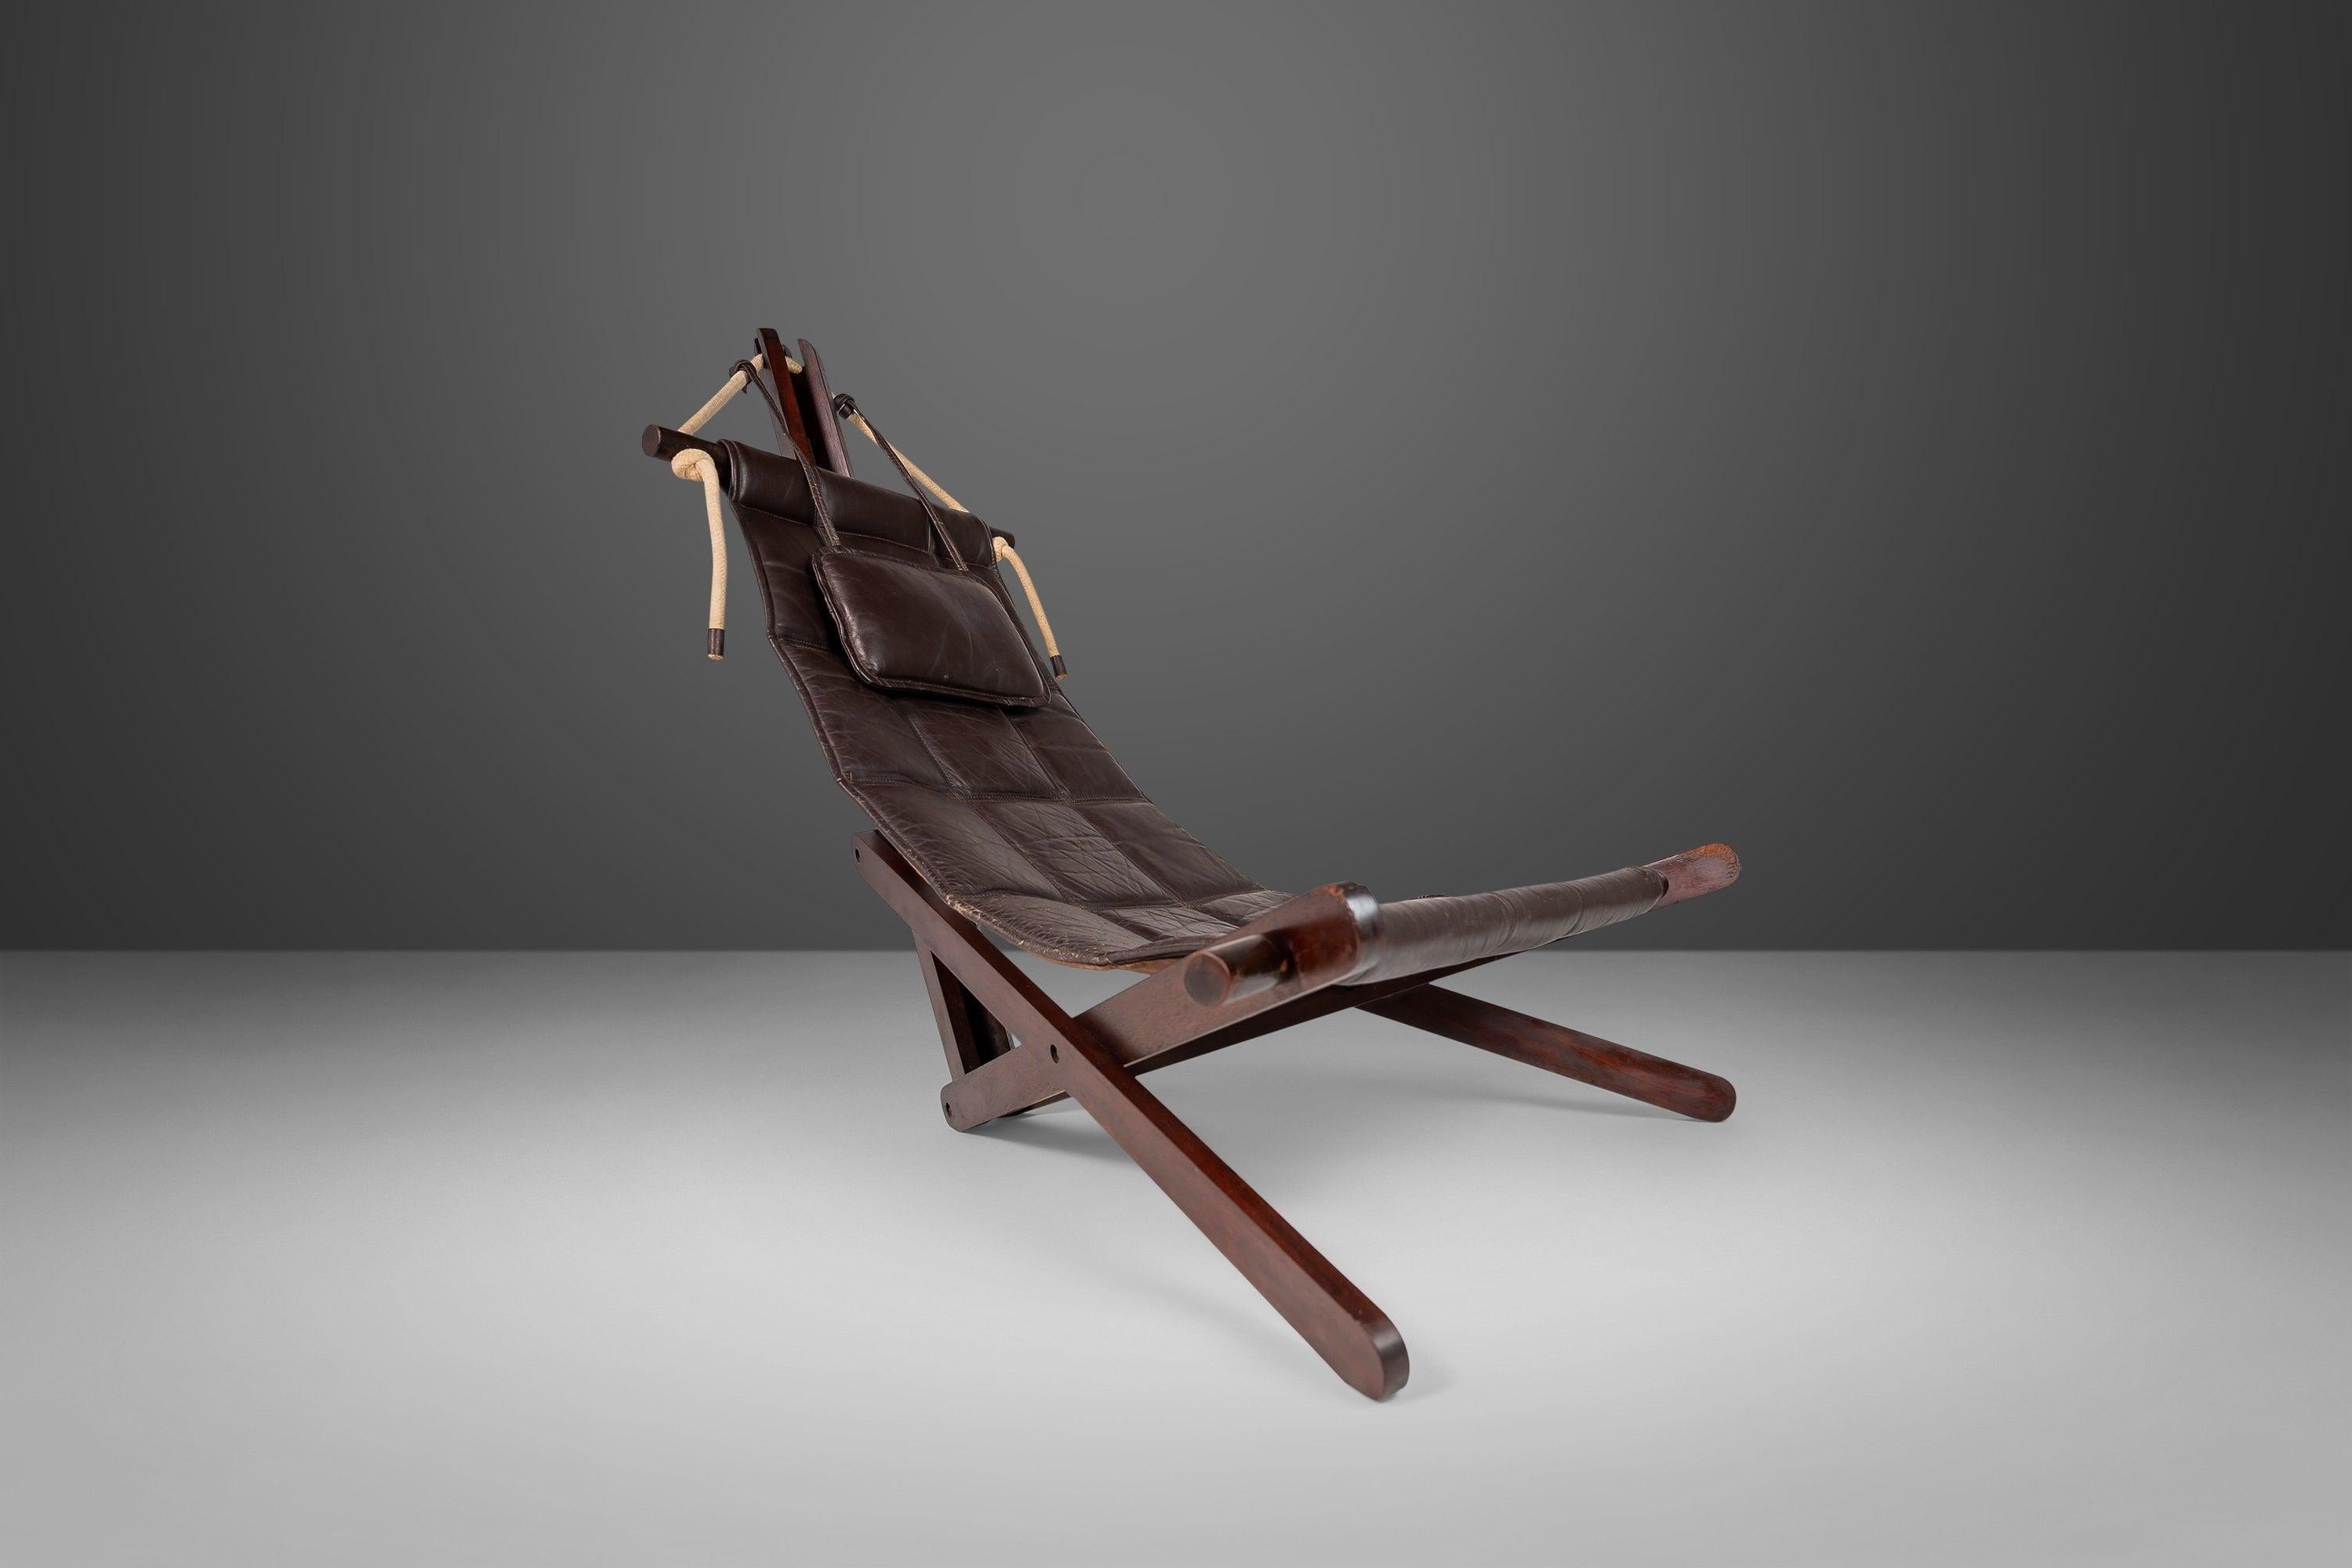 A collectable design by British architect, Dominic Michaelis for Moveis Corazza. The frame of the chair is constructed from Jabota wood (Brazilian Cherry) and supports a patinaed chocolate brown leather sling cushion. Circa